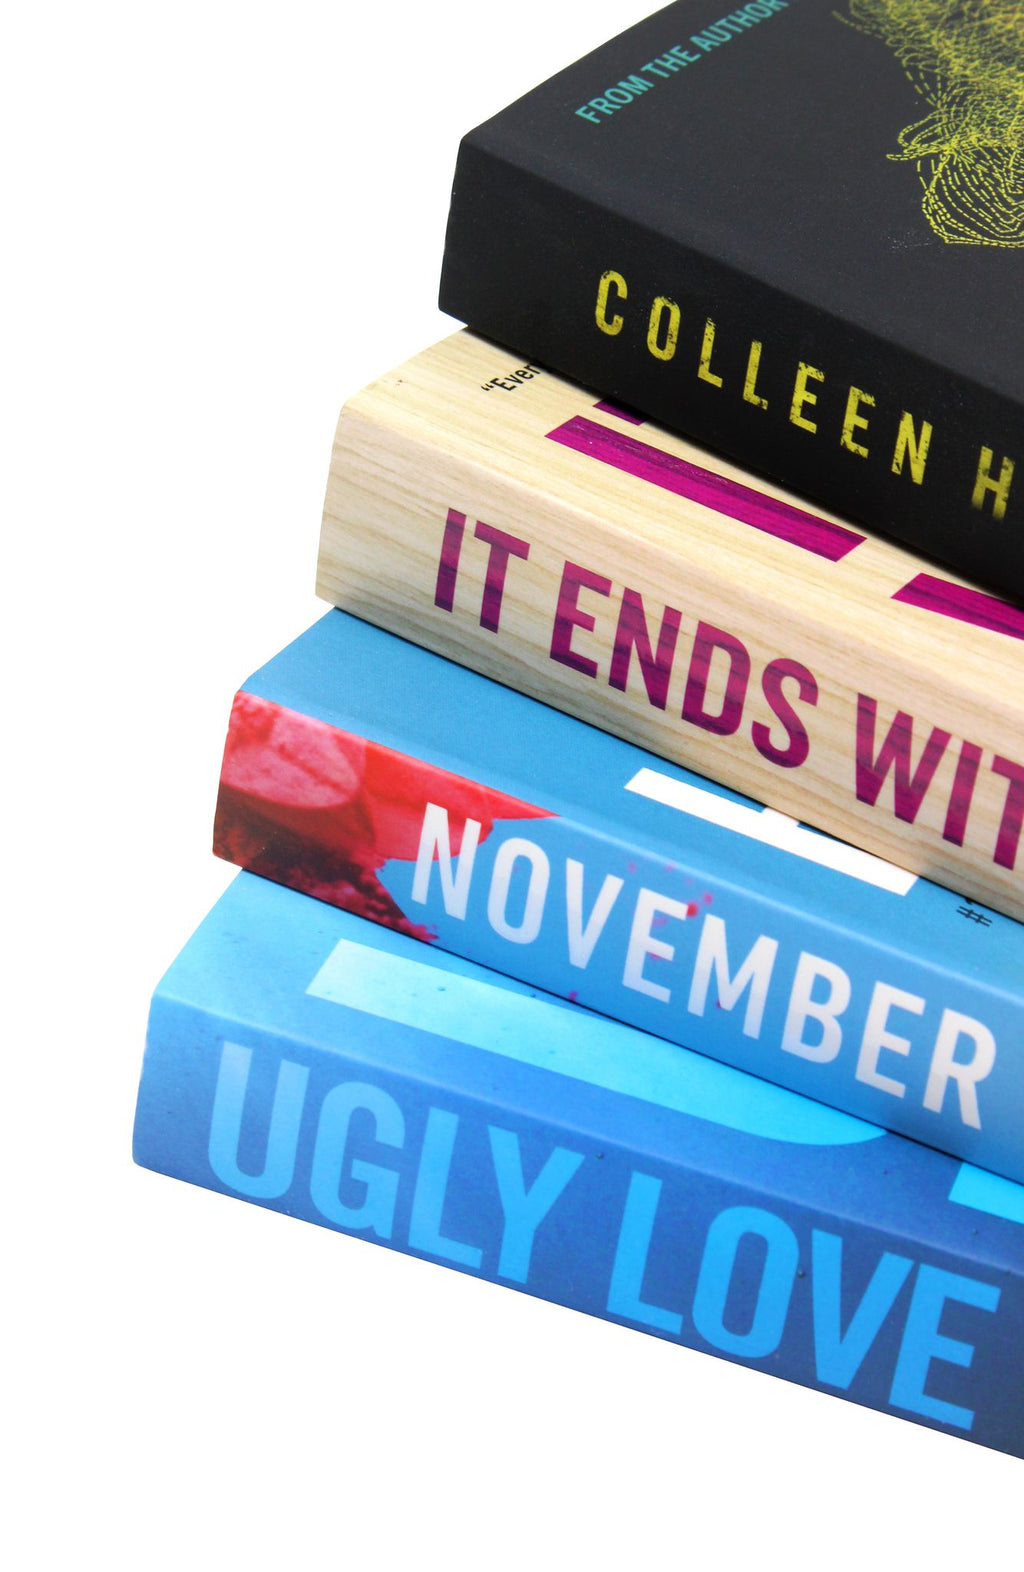 Book Bundle (It Ends With Us, November 9, Ugly Love, Verity)